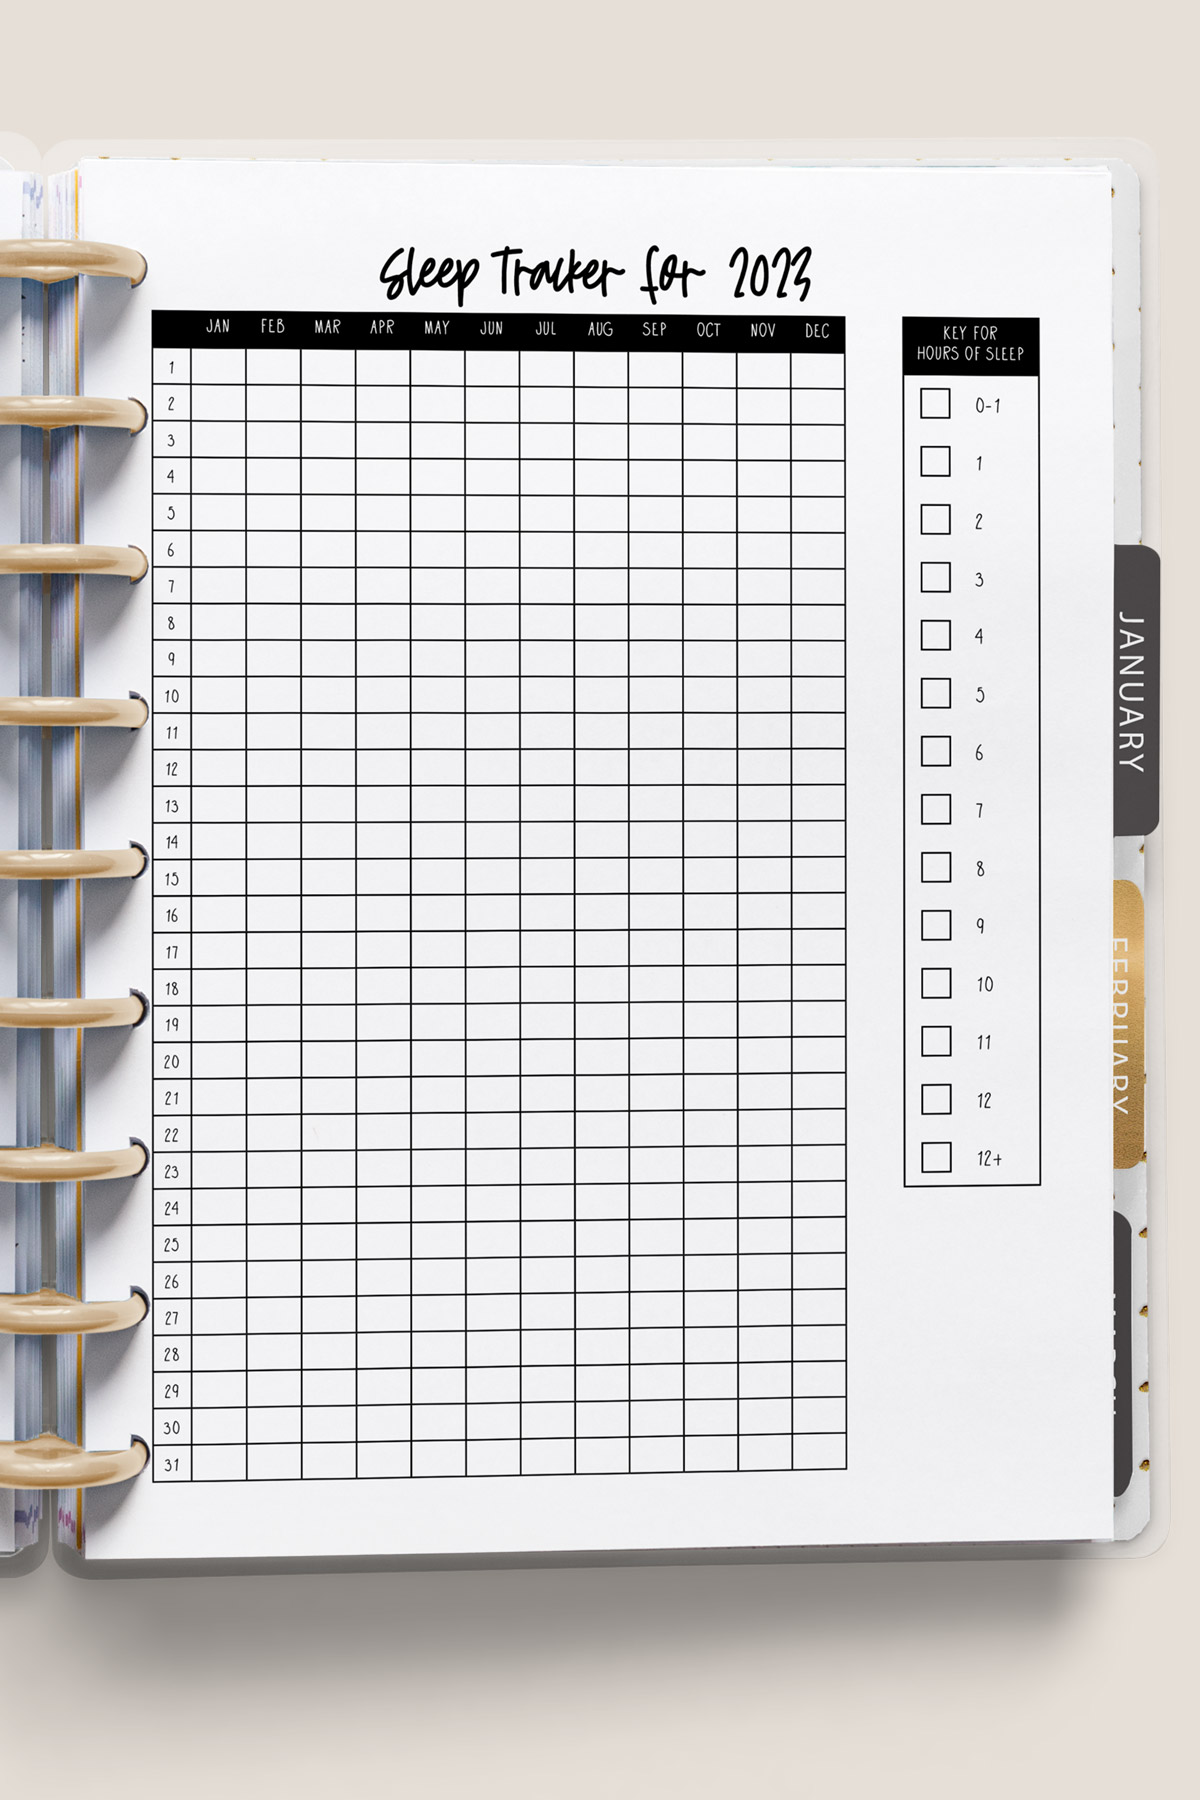 This image shows the sleep tracker printable you can get for free at the end of this blog post. This is showing the yearly version of the sleep log.